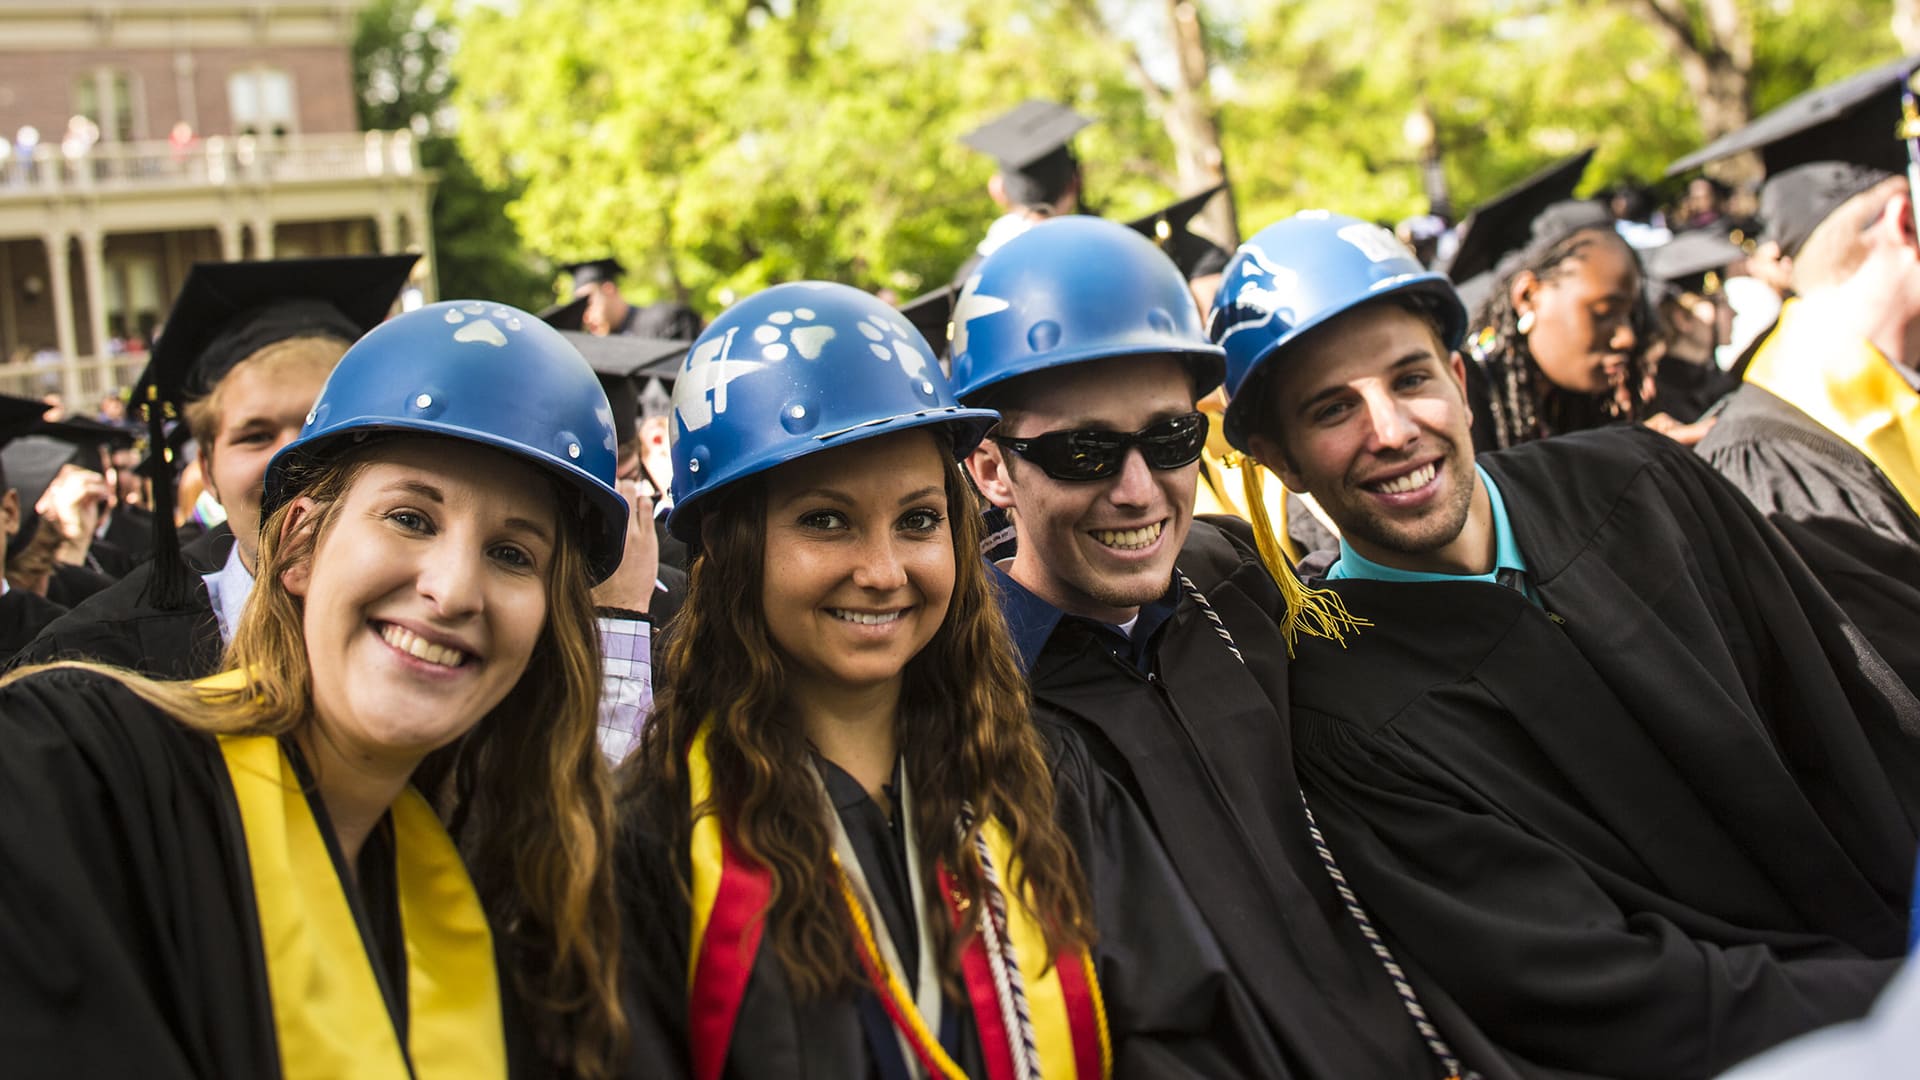 Engineering graduates wearing hard hats at commencement